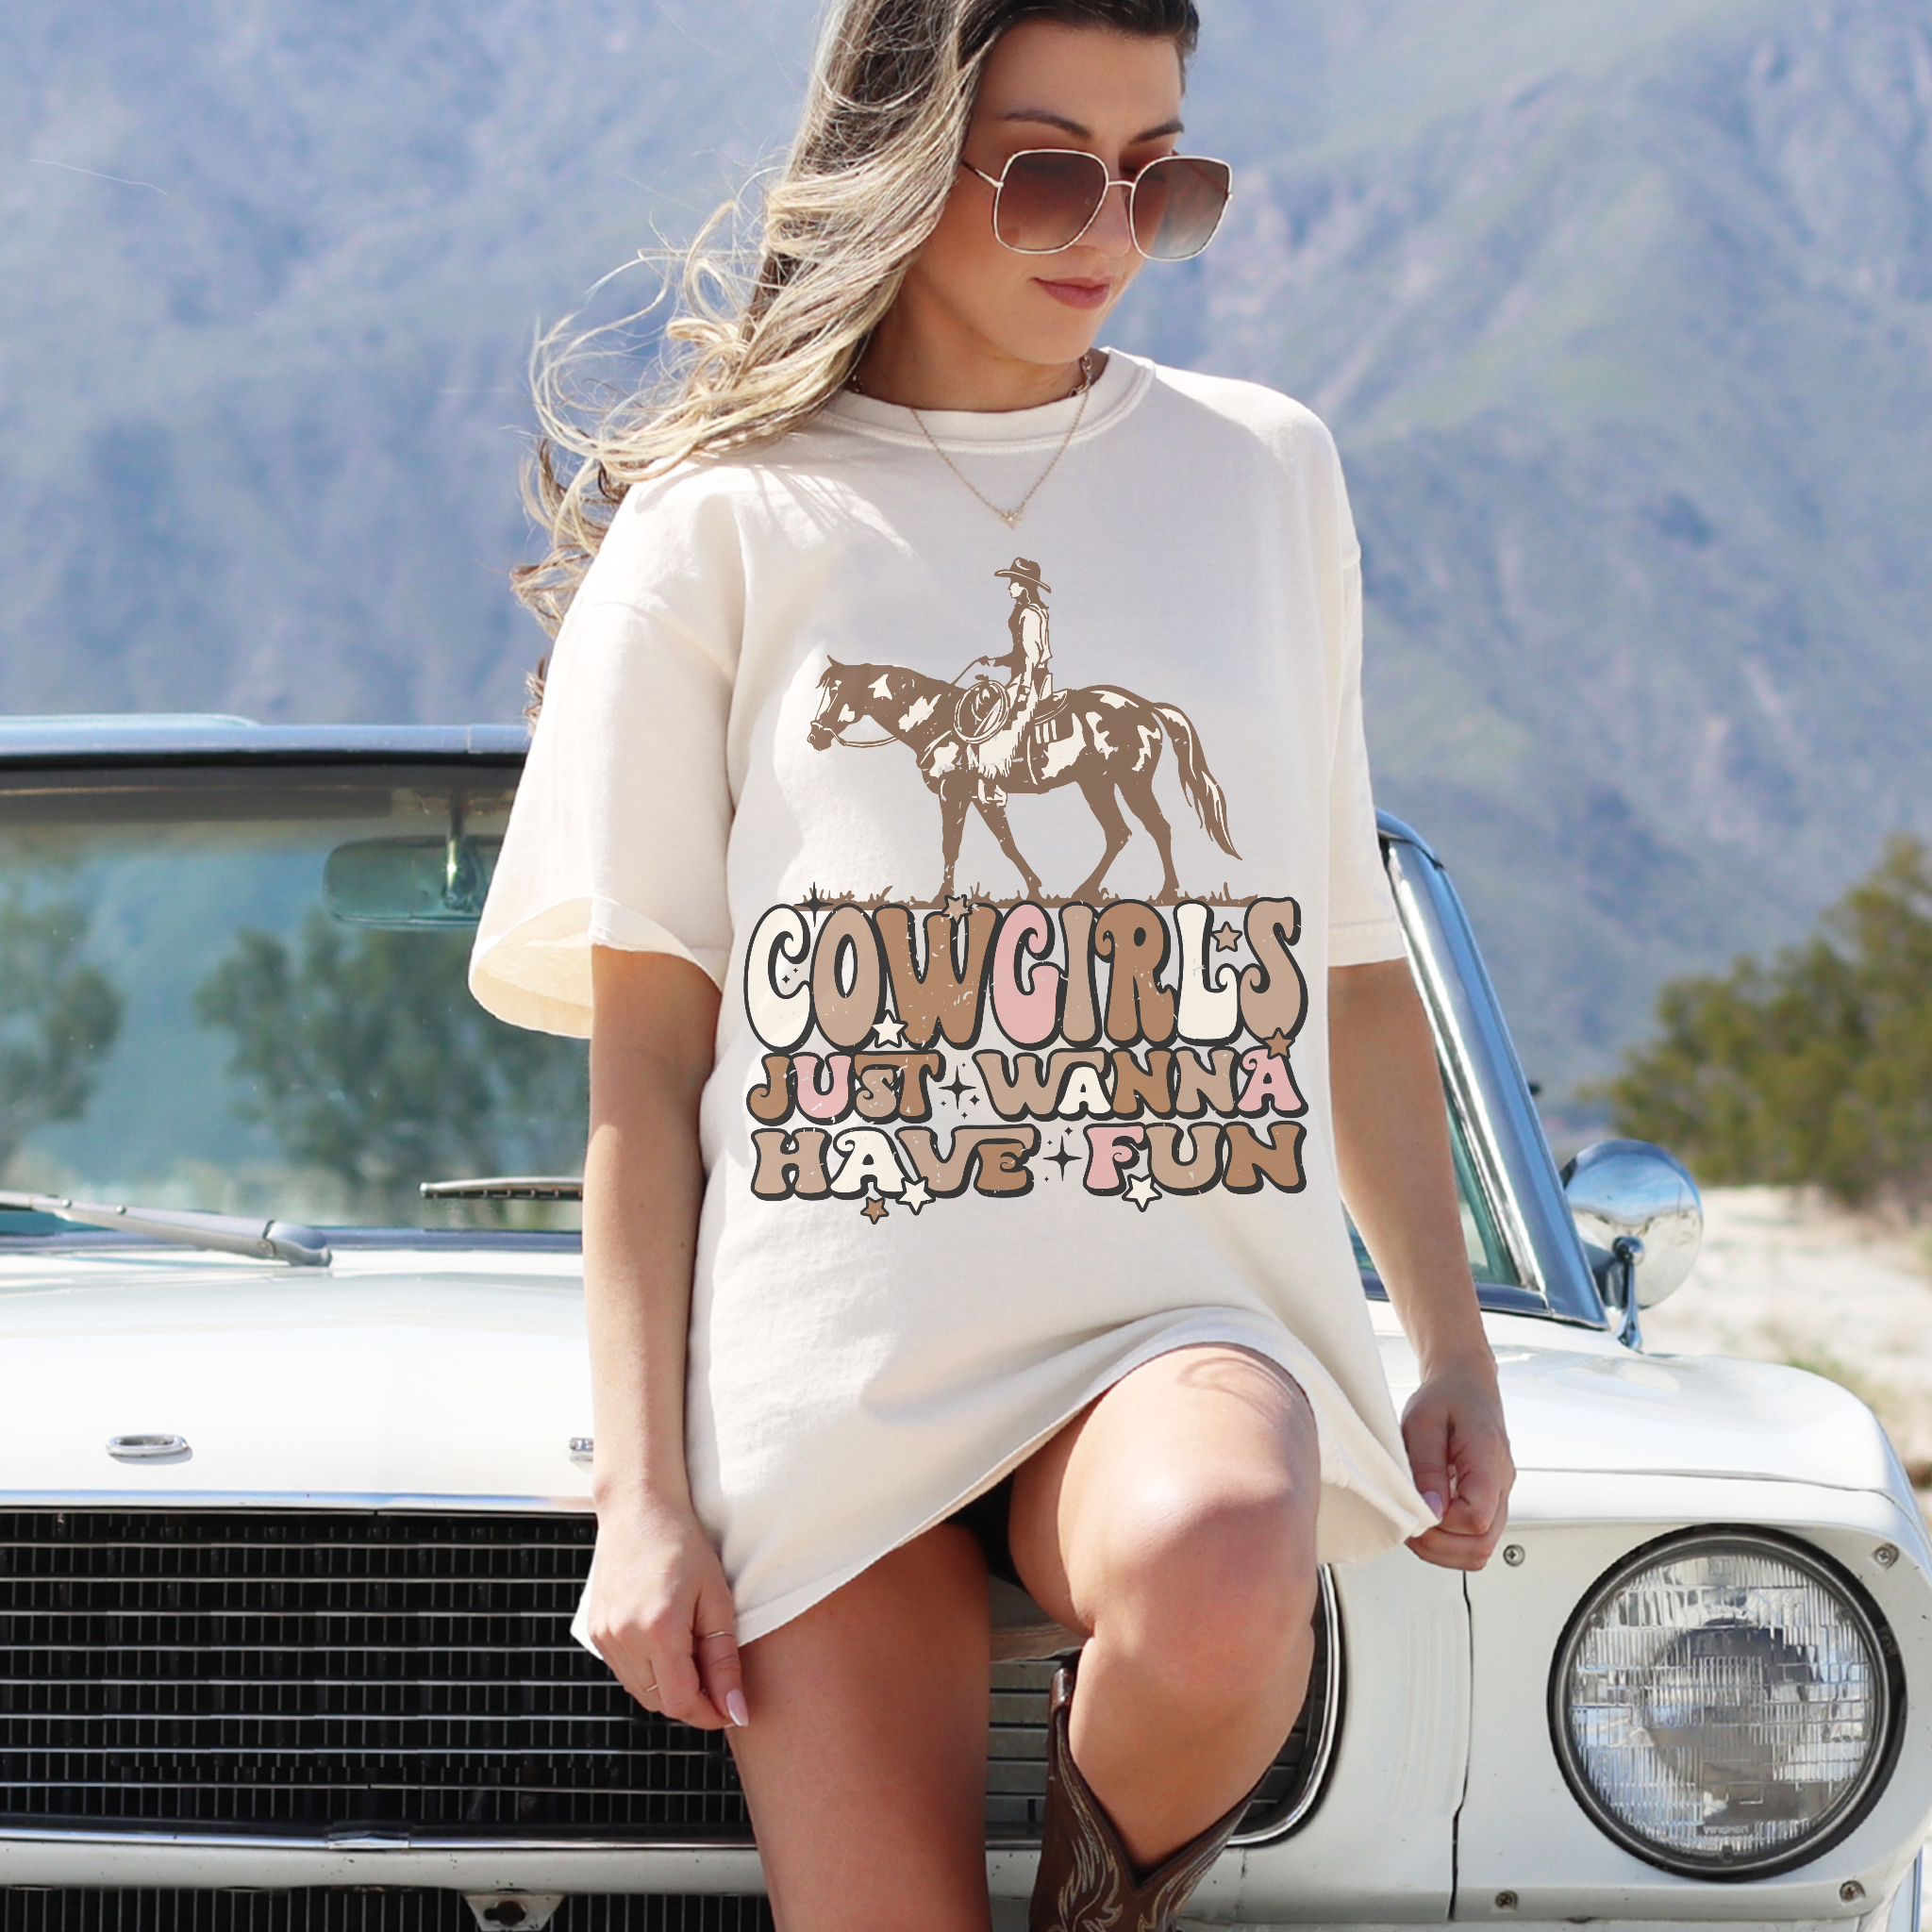 Cowgirls Just Wanna Have Fun Sublimation Transfer